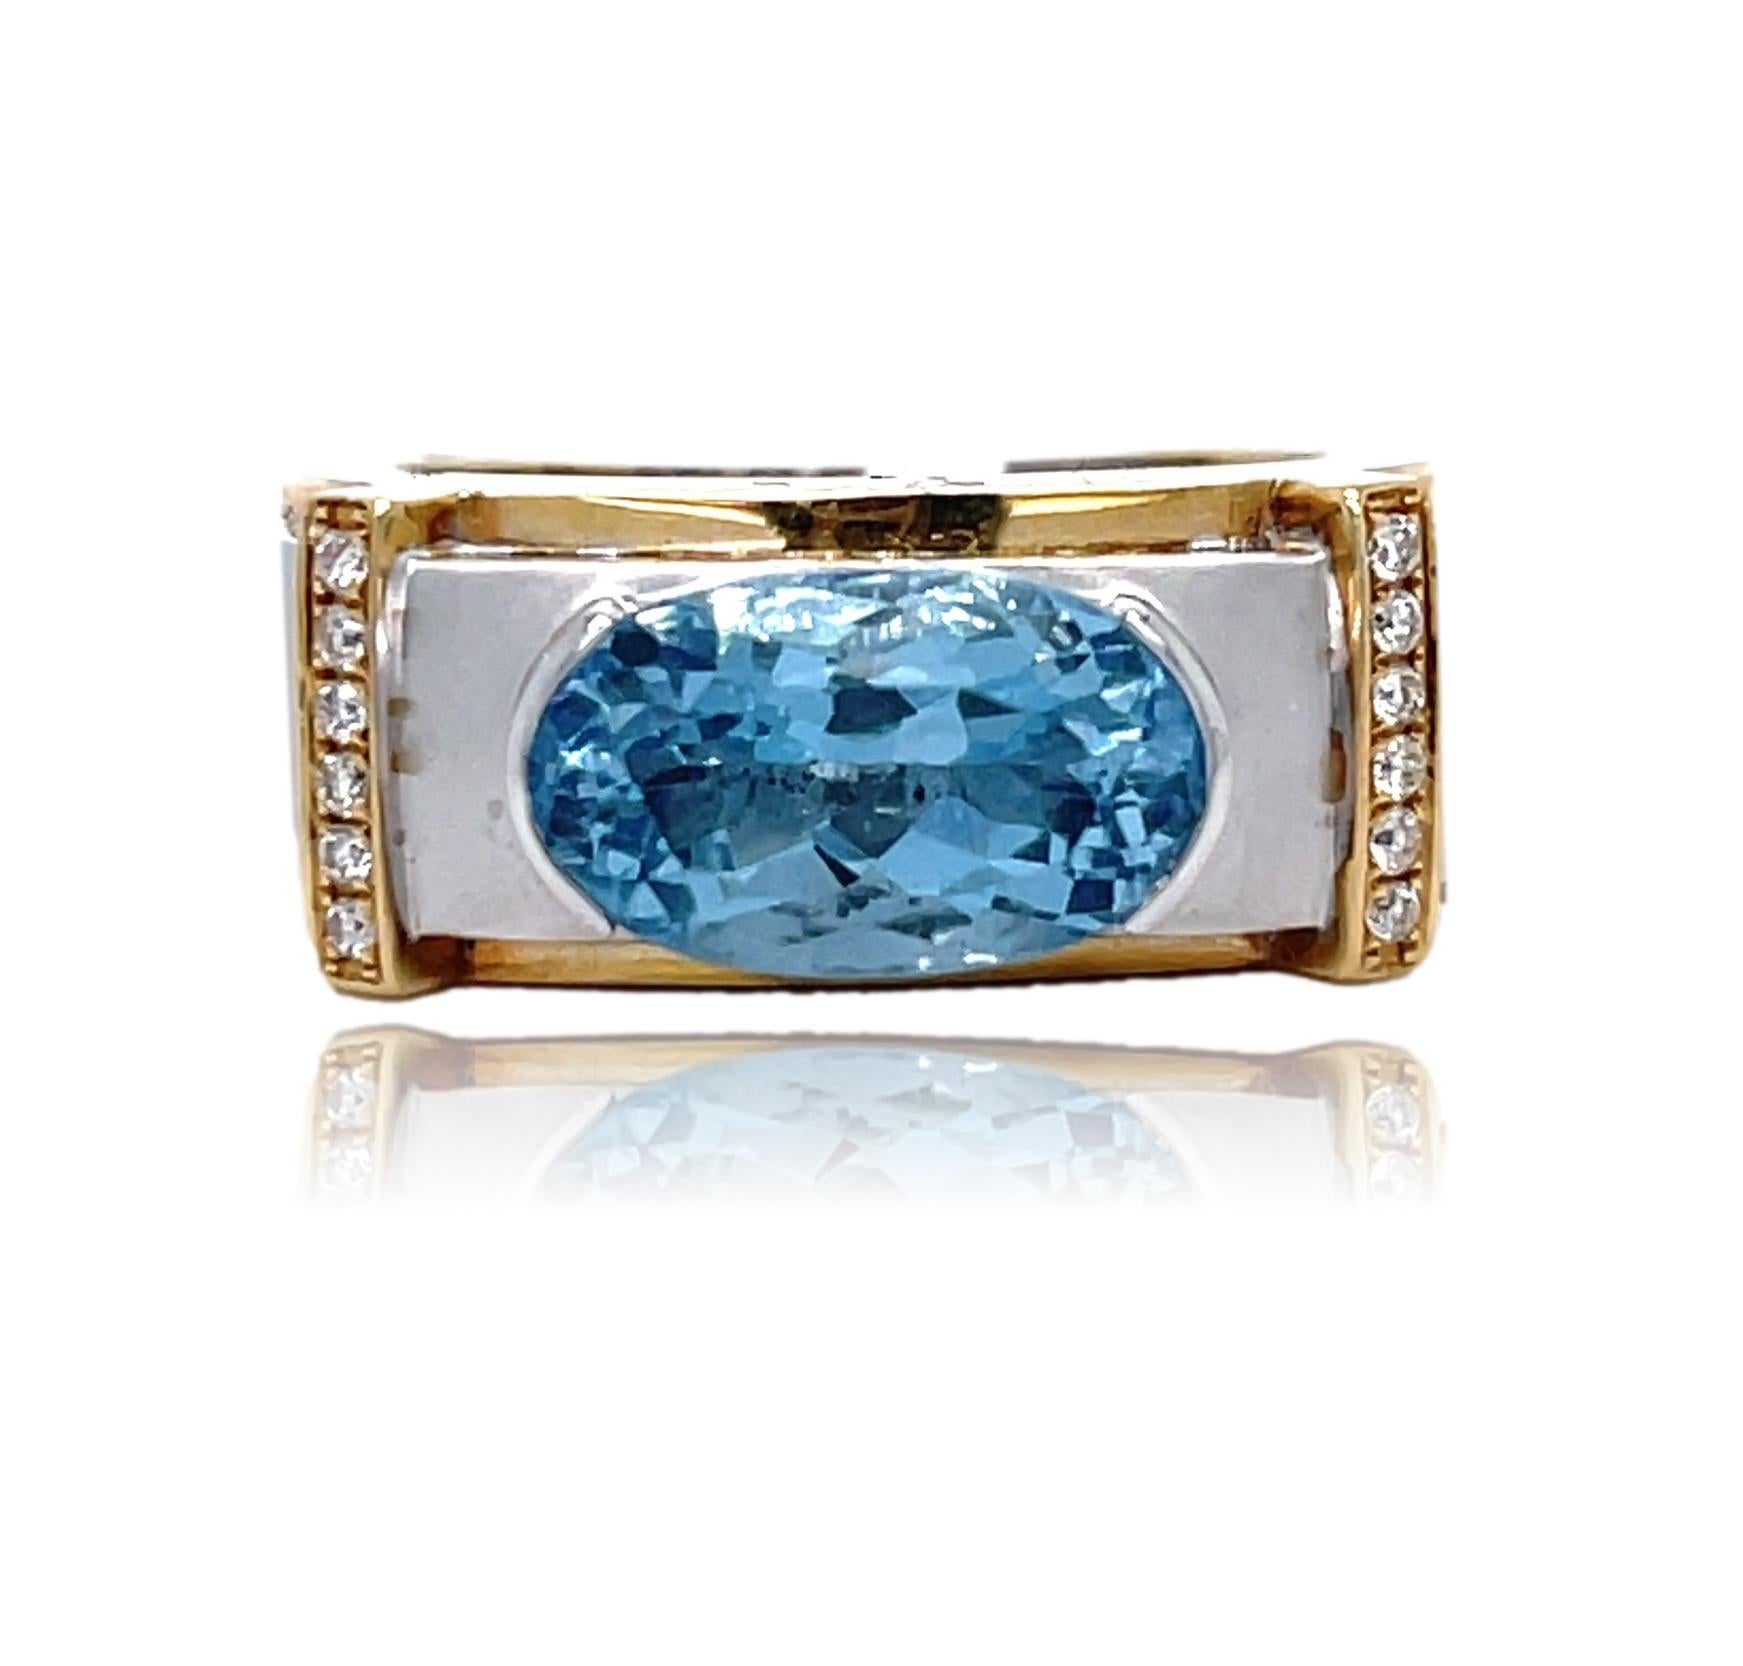 This unique Two Tone Men's ring has a sparkling blue top quality oval Aquamarine center surrounded by brilliant cut diamonds  and is set in 14K white and yellow gold. It comes in a beautiful box ready for the perfect gift!

14KW:            11.75